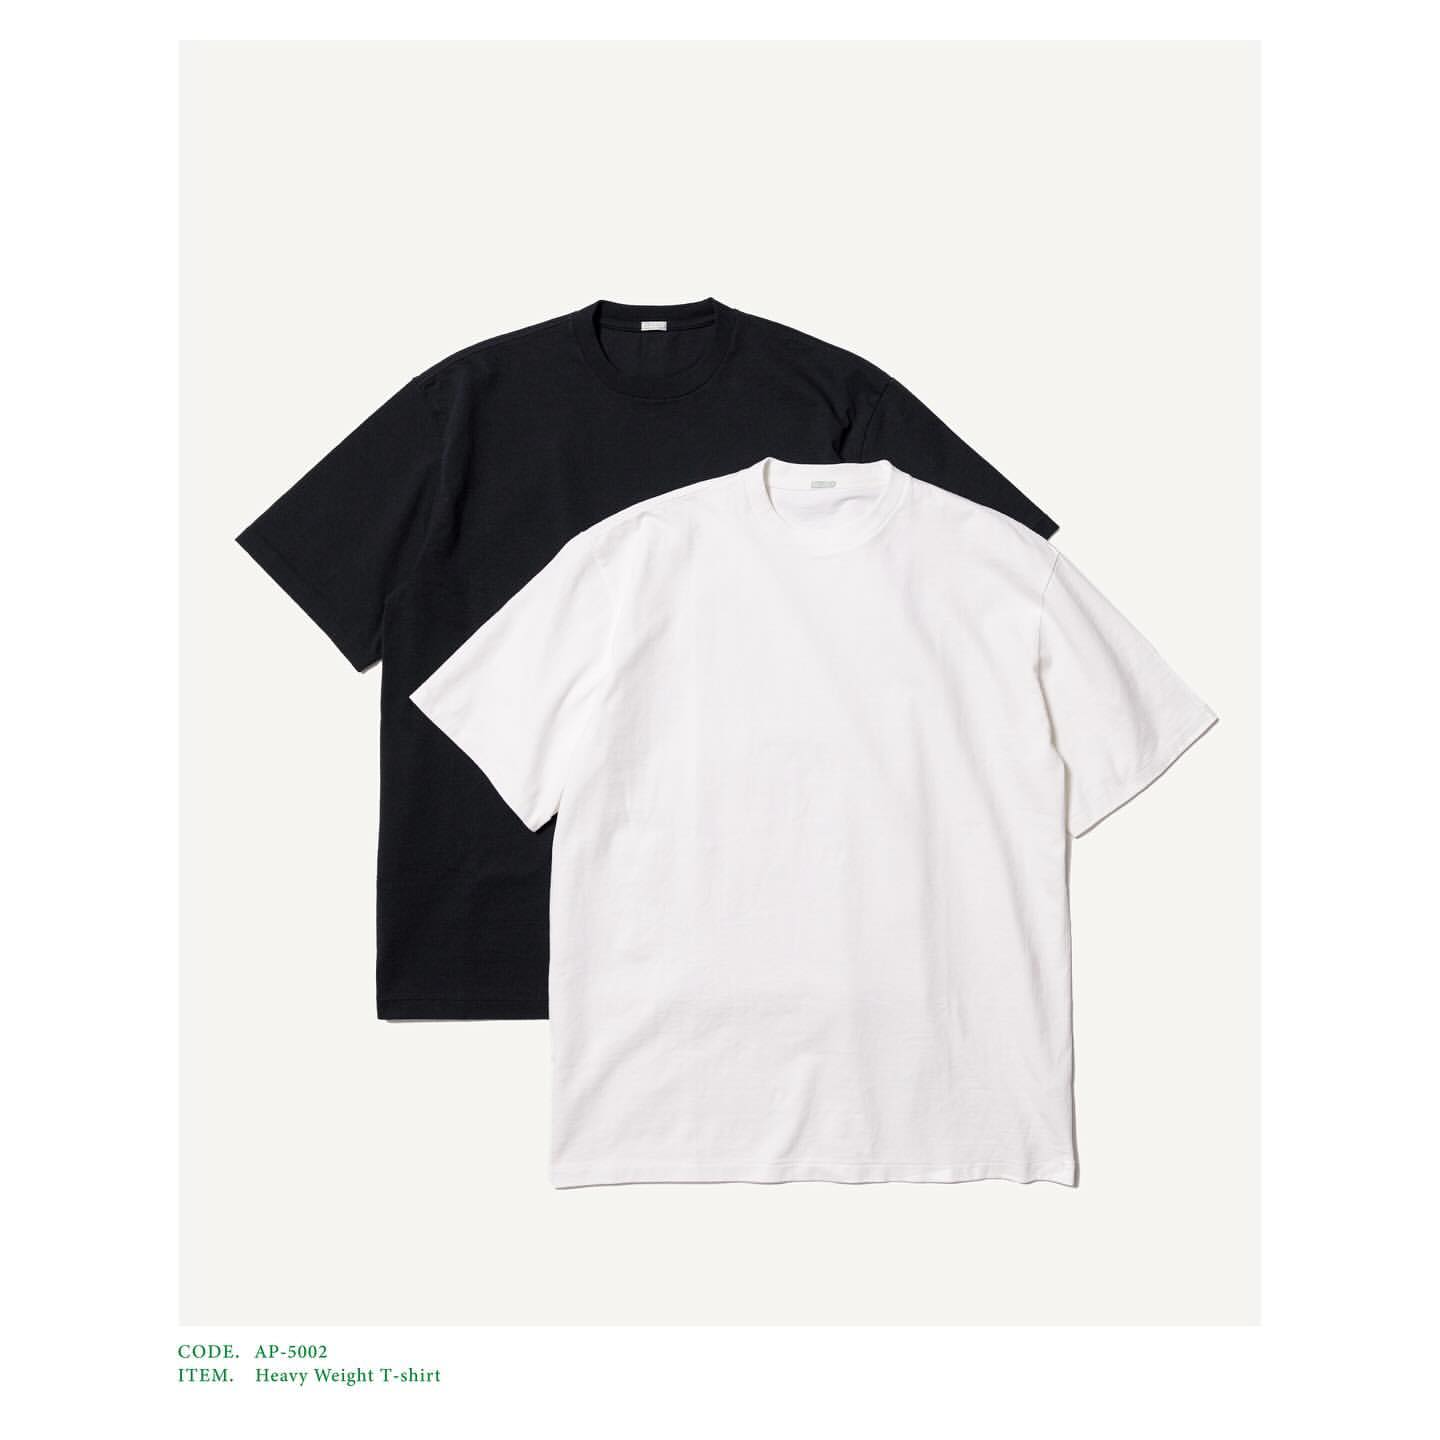 A.PRESSE 24AW Heavy Weight T-shirt